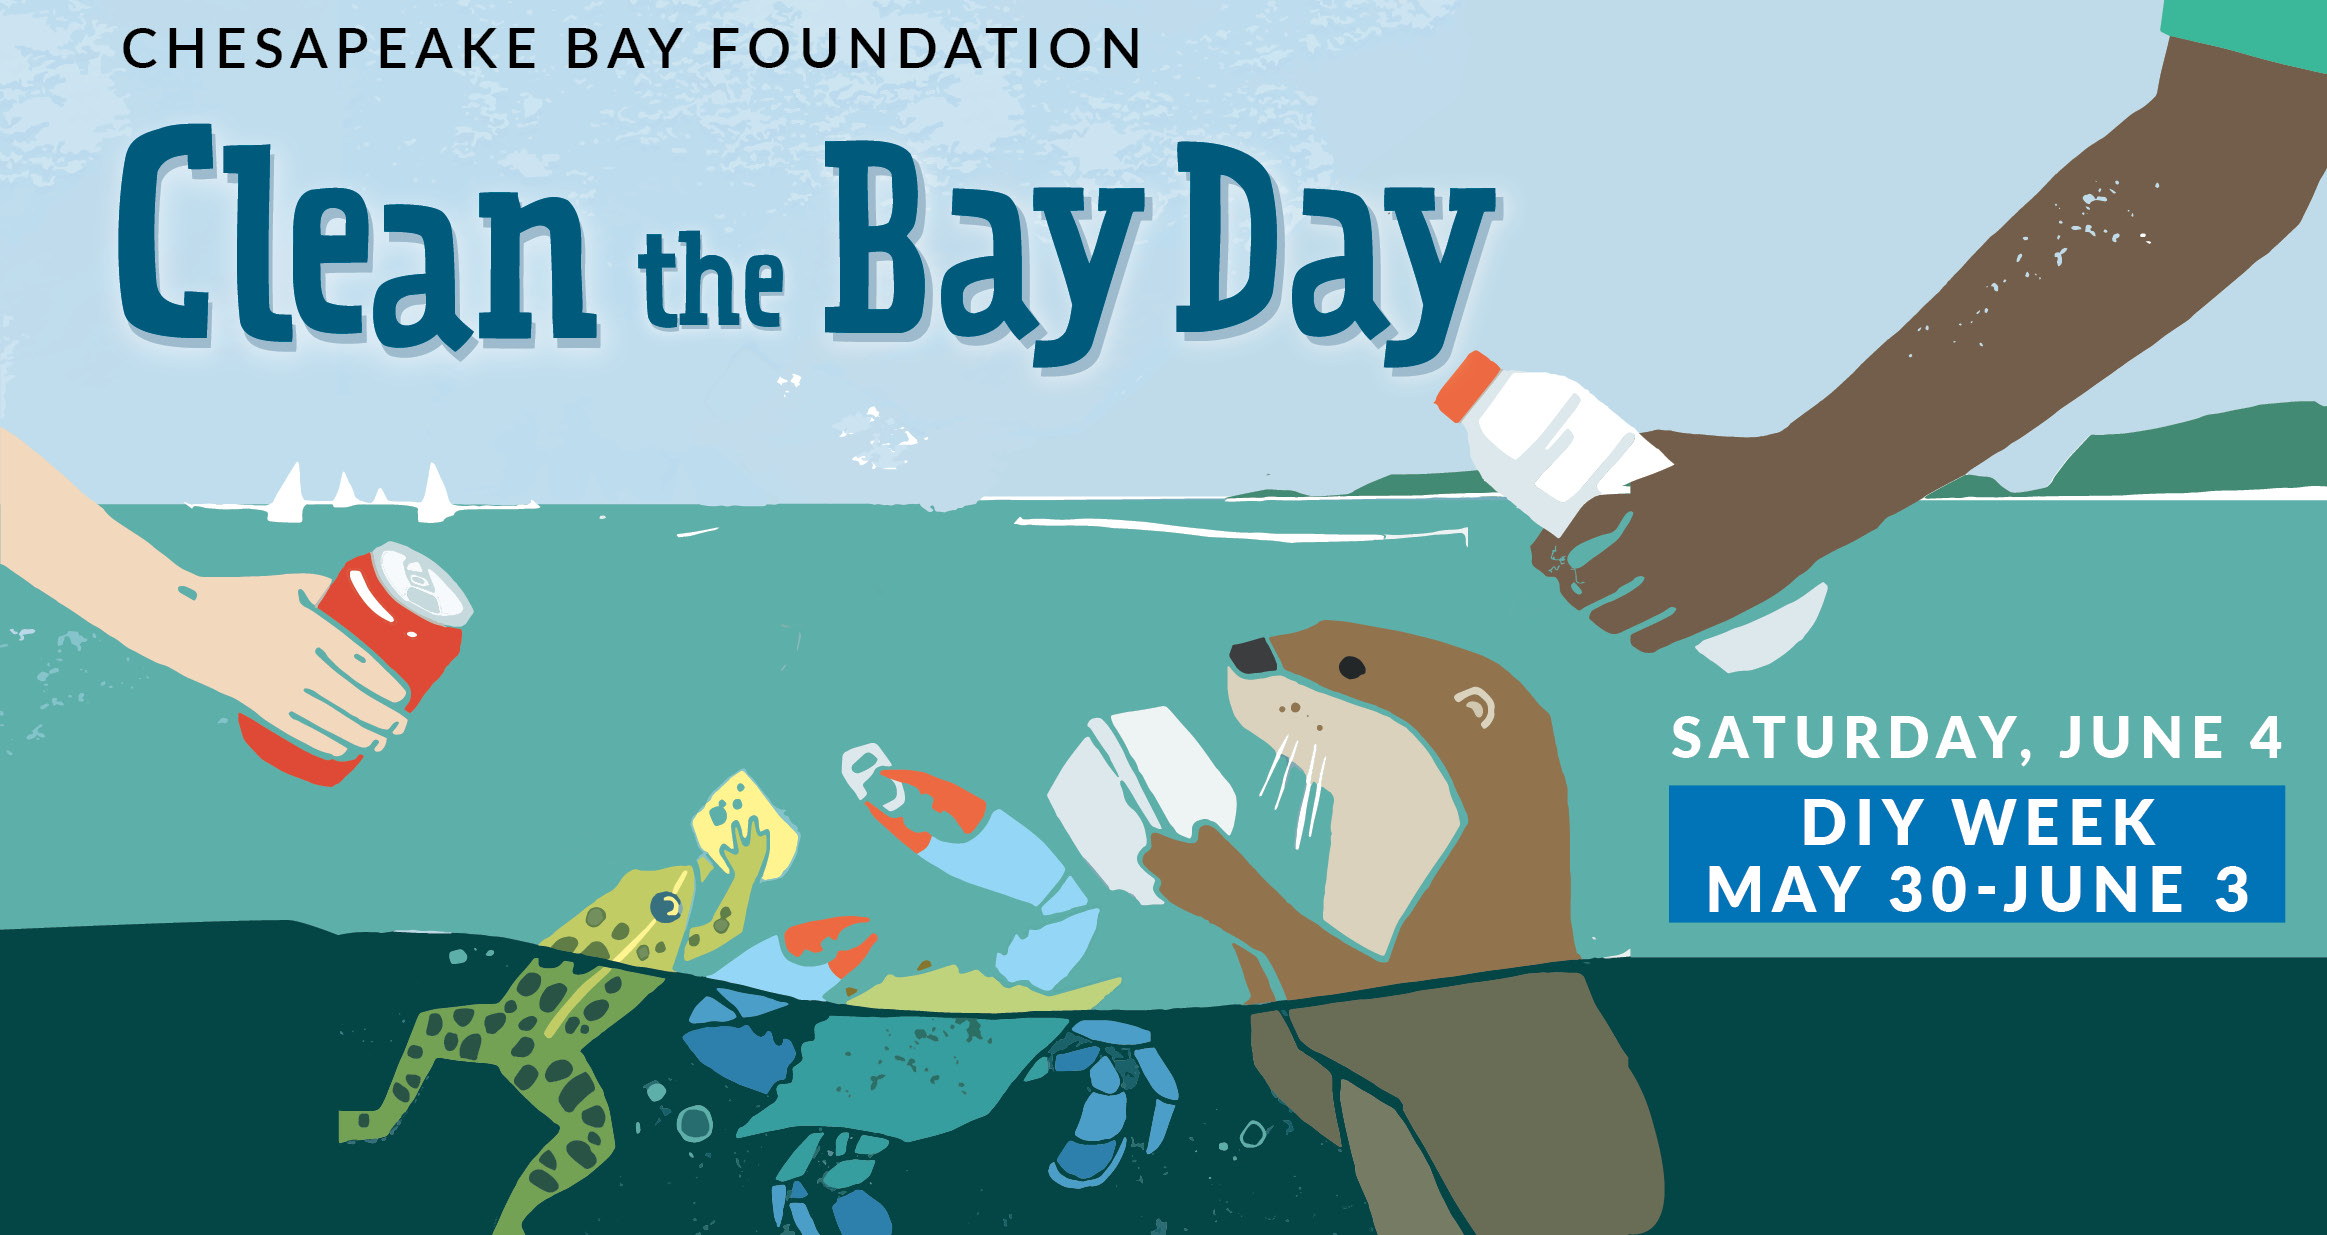 Artwork depicting human hands and a frog, a blue crab, and an otter lifting cans, bottles, and other trash out of the Bay. Chesapeake Bay Foundation Clean the Bay Day Saturday, June 4. DIY Week May 30-June 3.